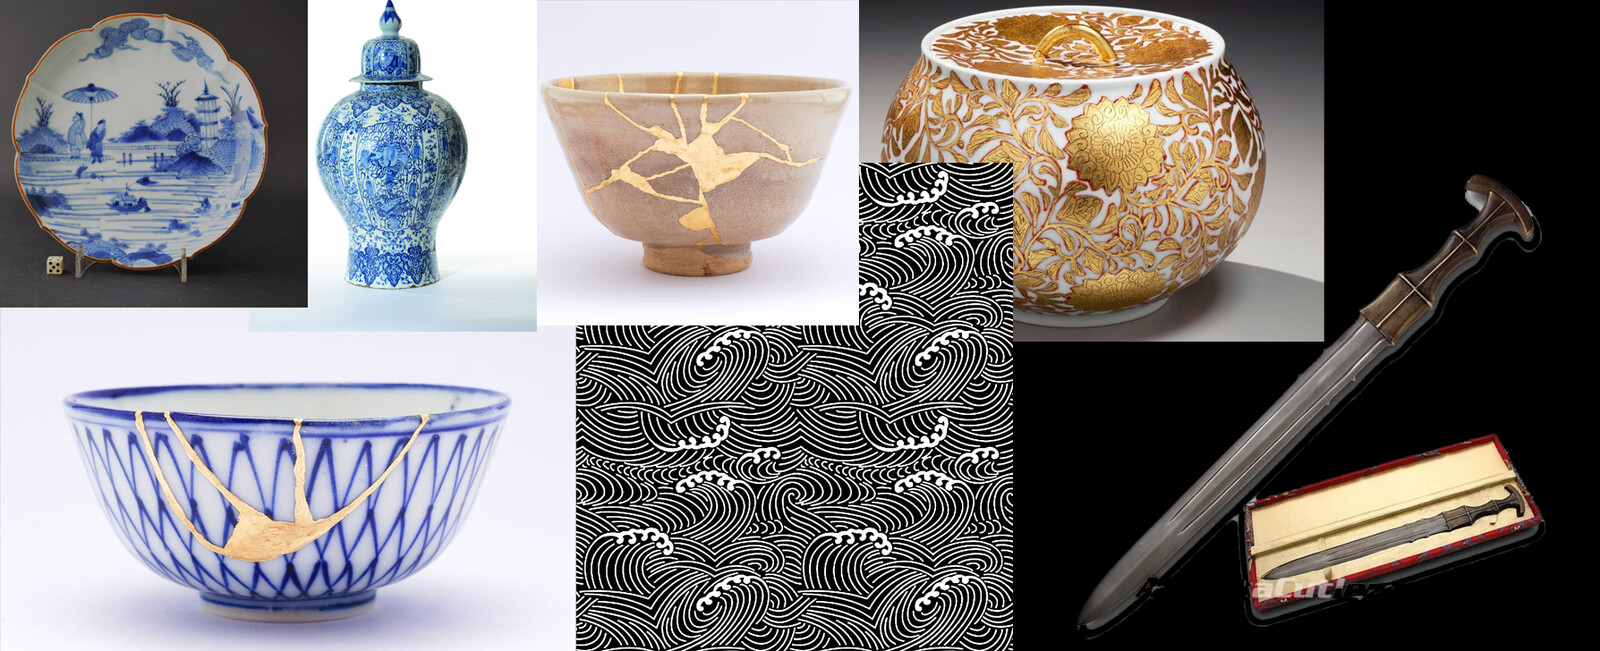 reference images including japanese/dutch delftware, kintsugi, painted gold leaf, and a replica of the sword I was aiming to reproduce